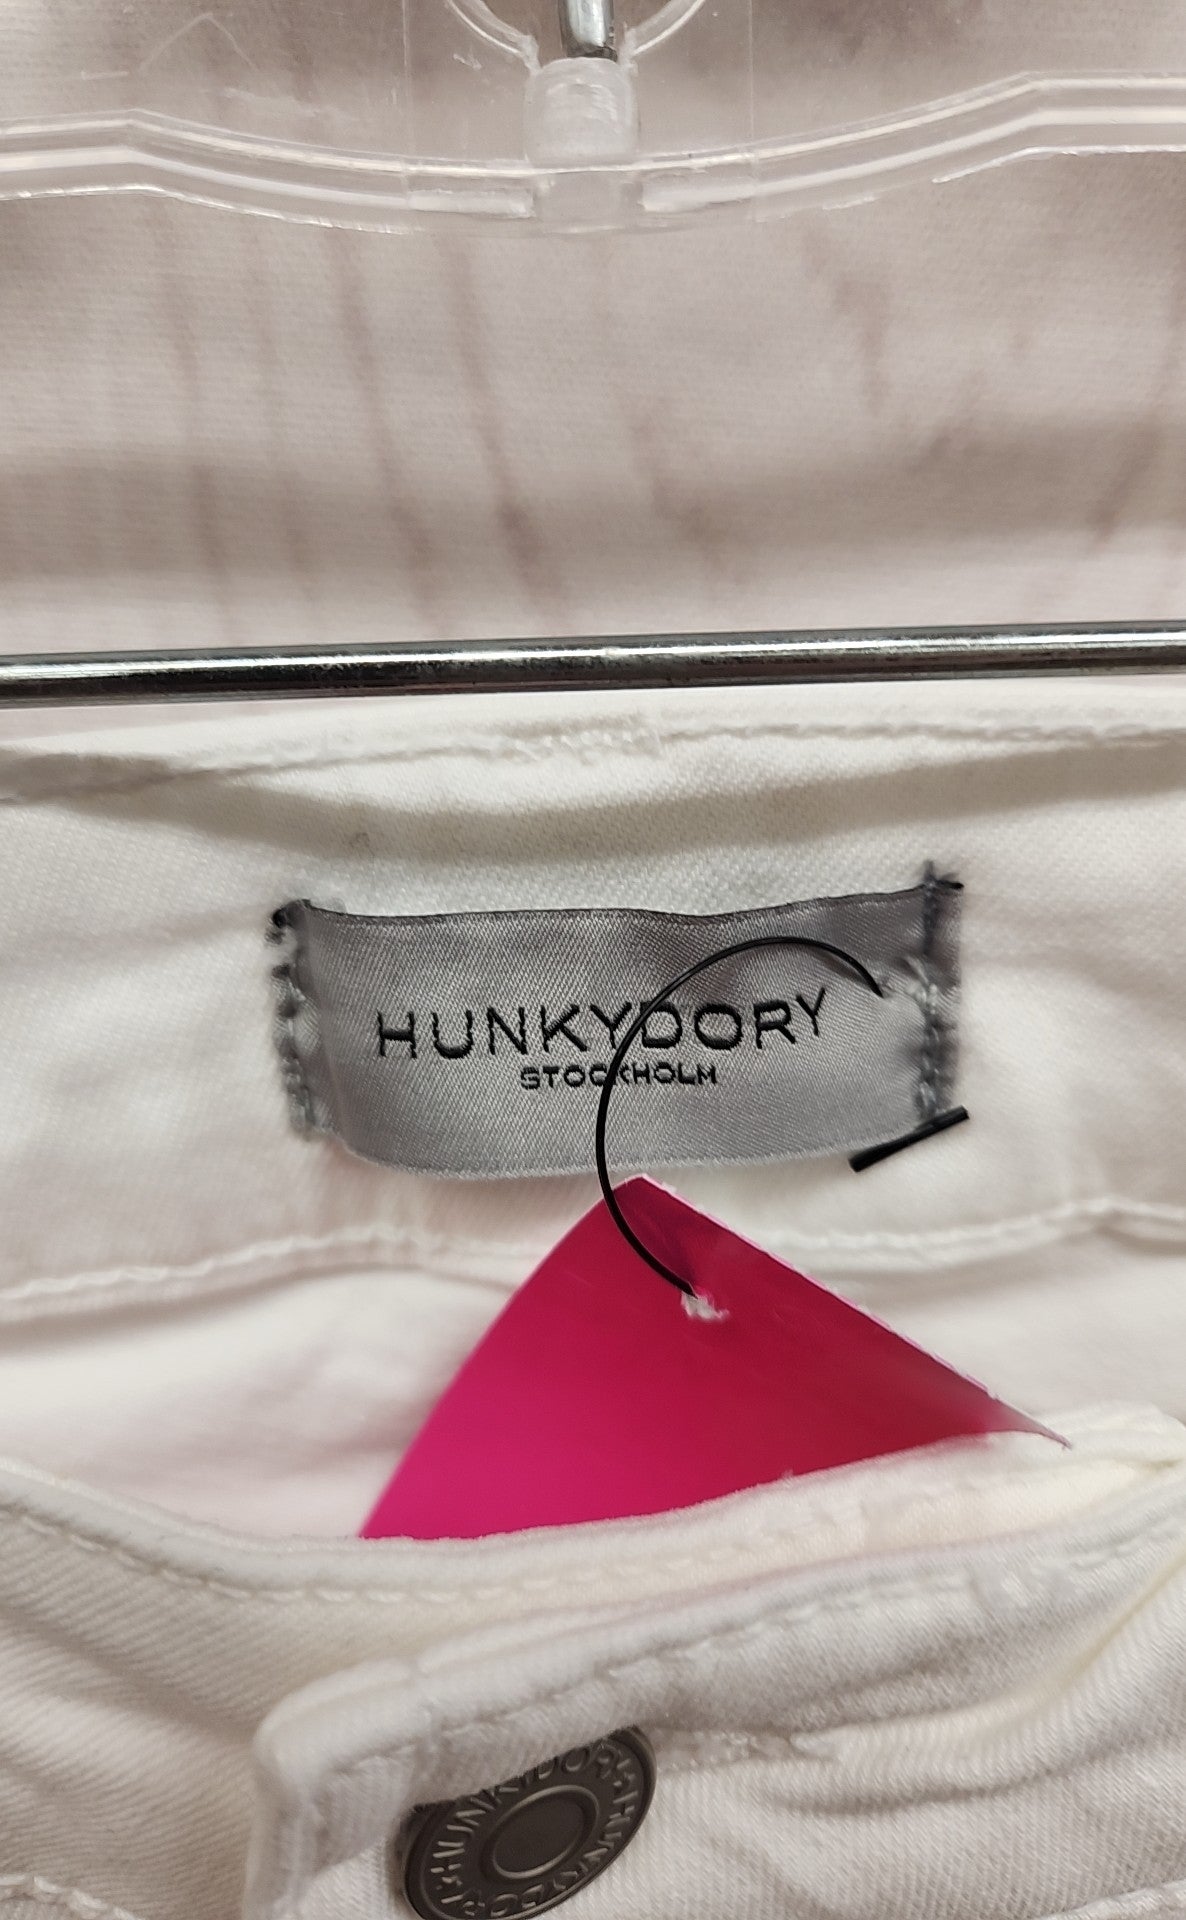 Hunky Dory Women's Size 24 (00) White Jeans